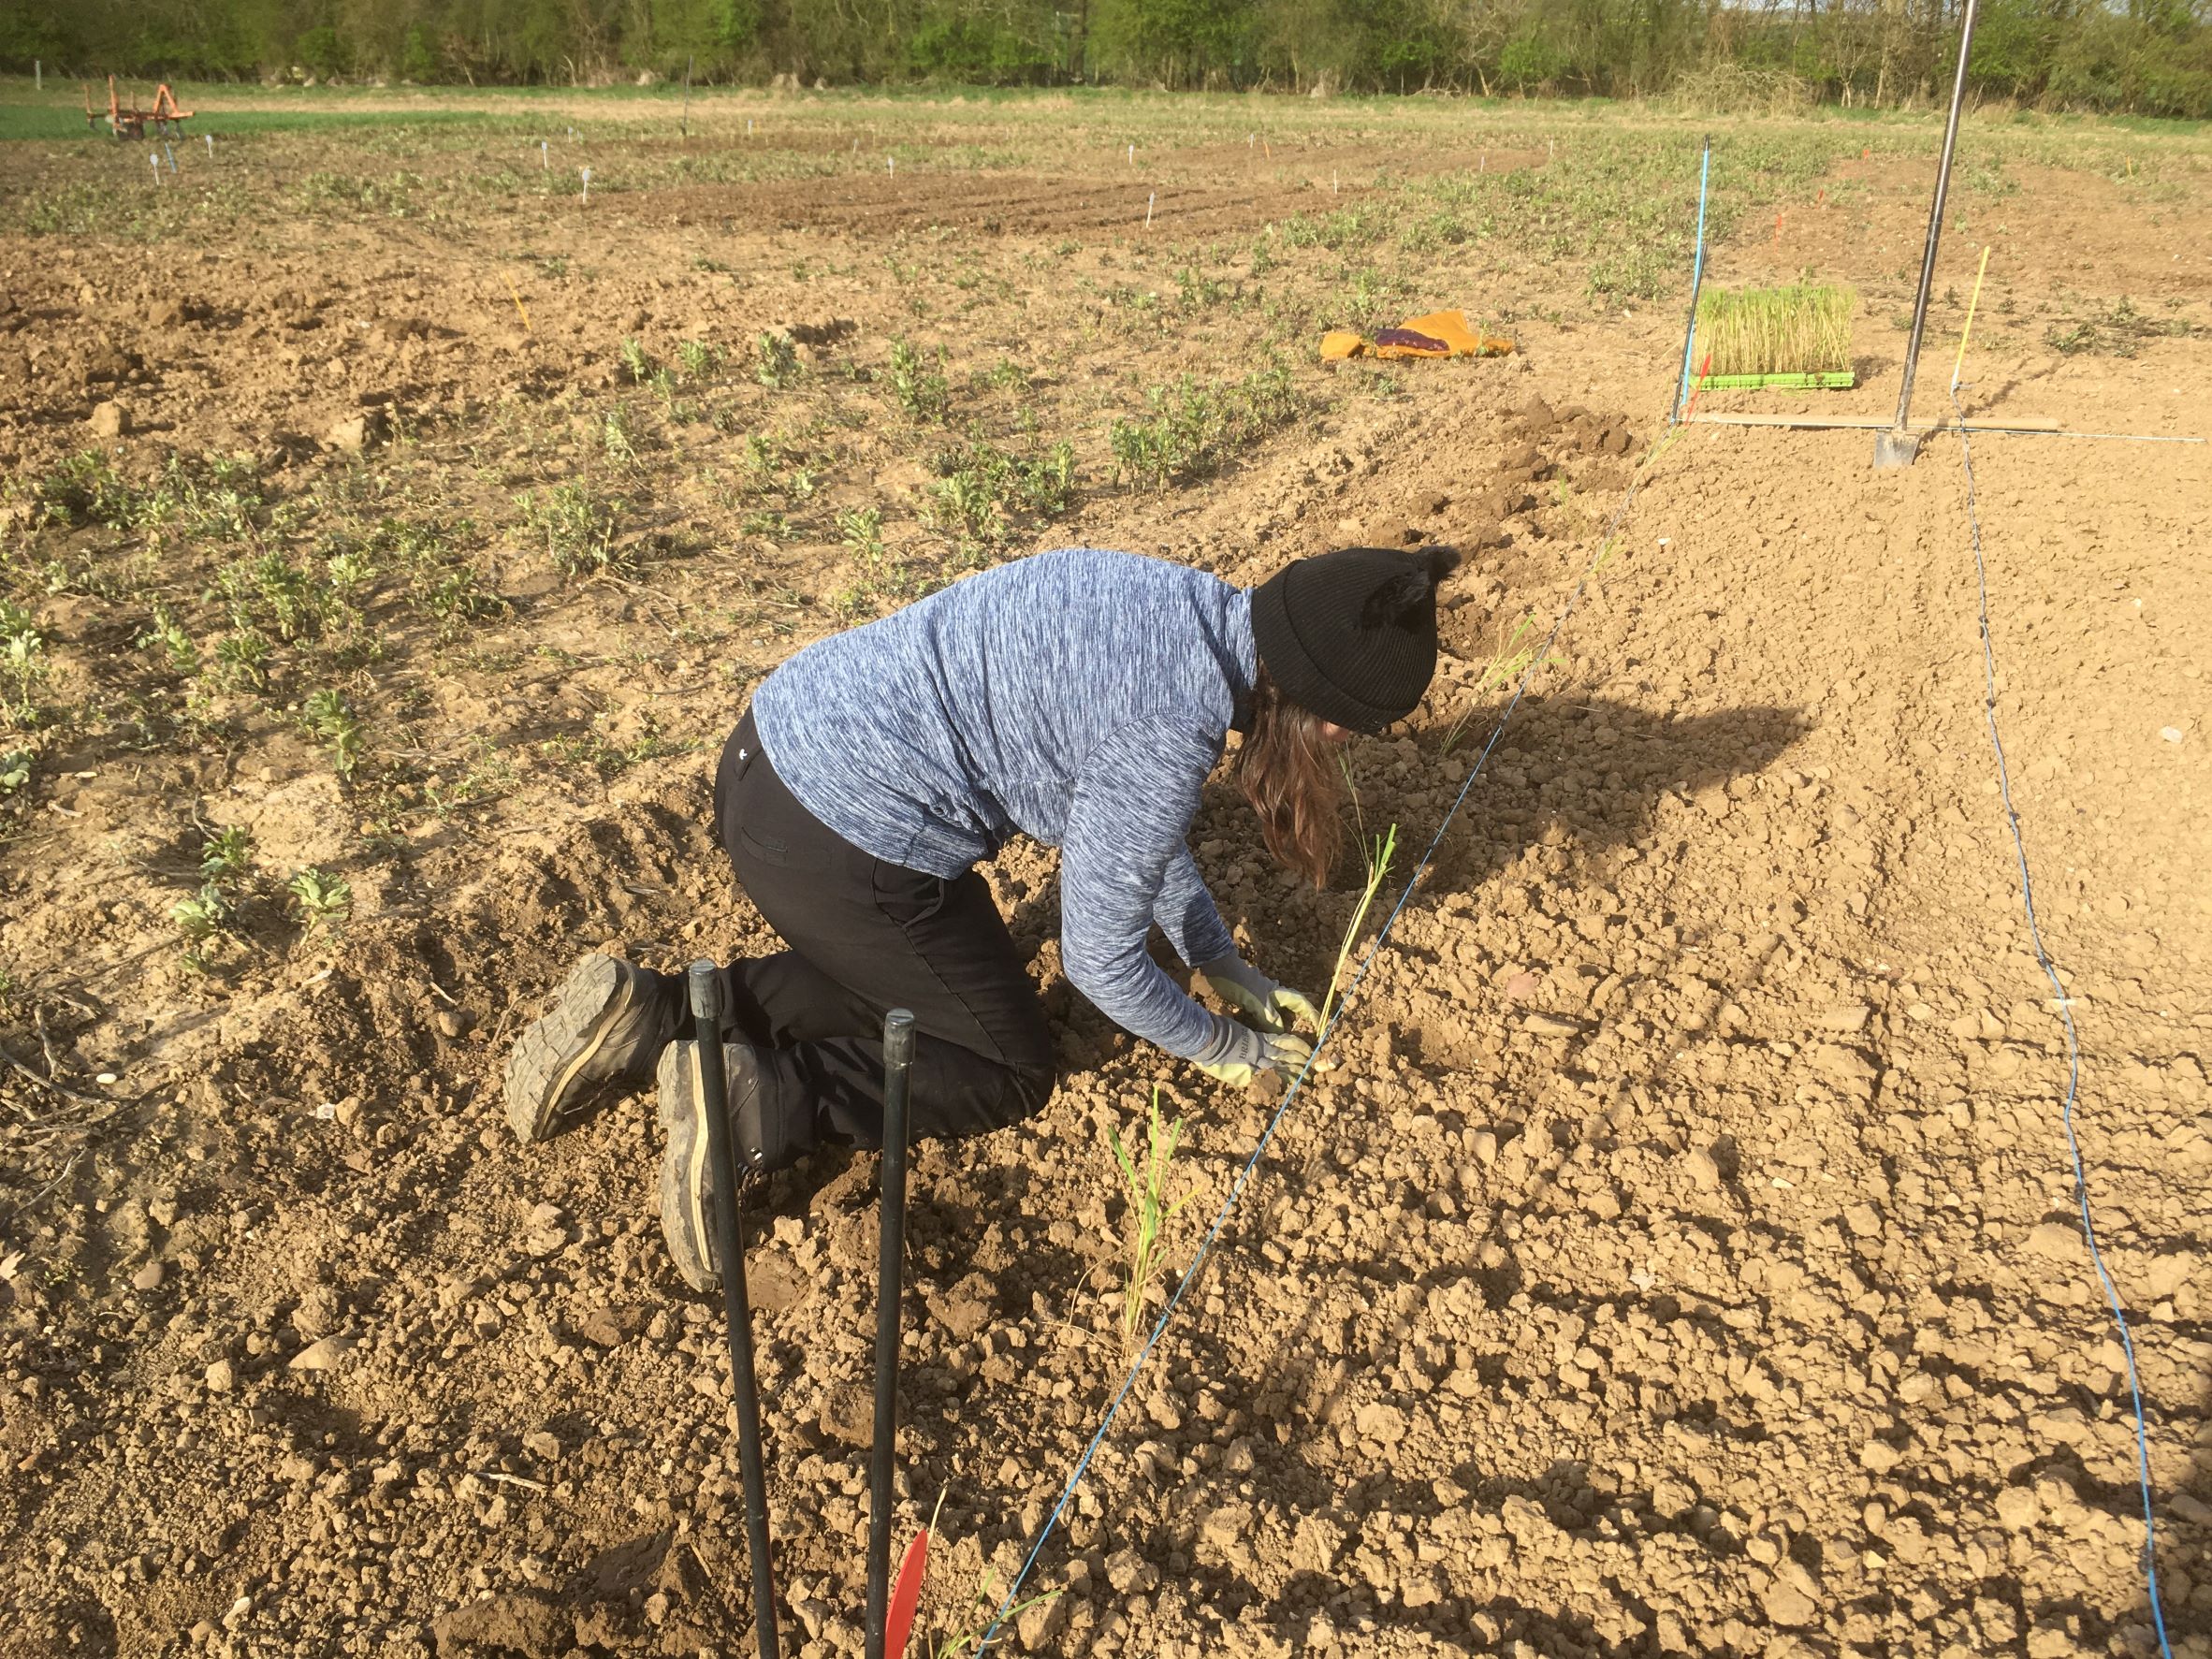 Treading in the Miscanthus plugs